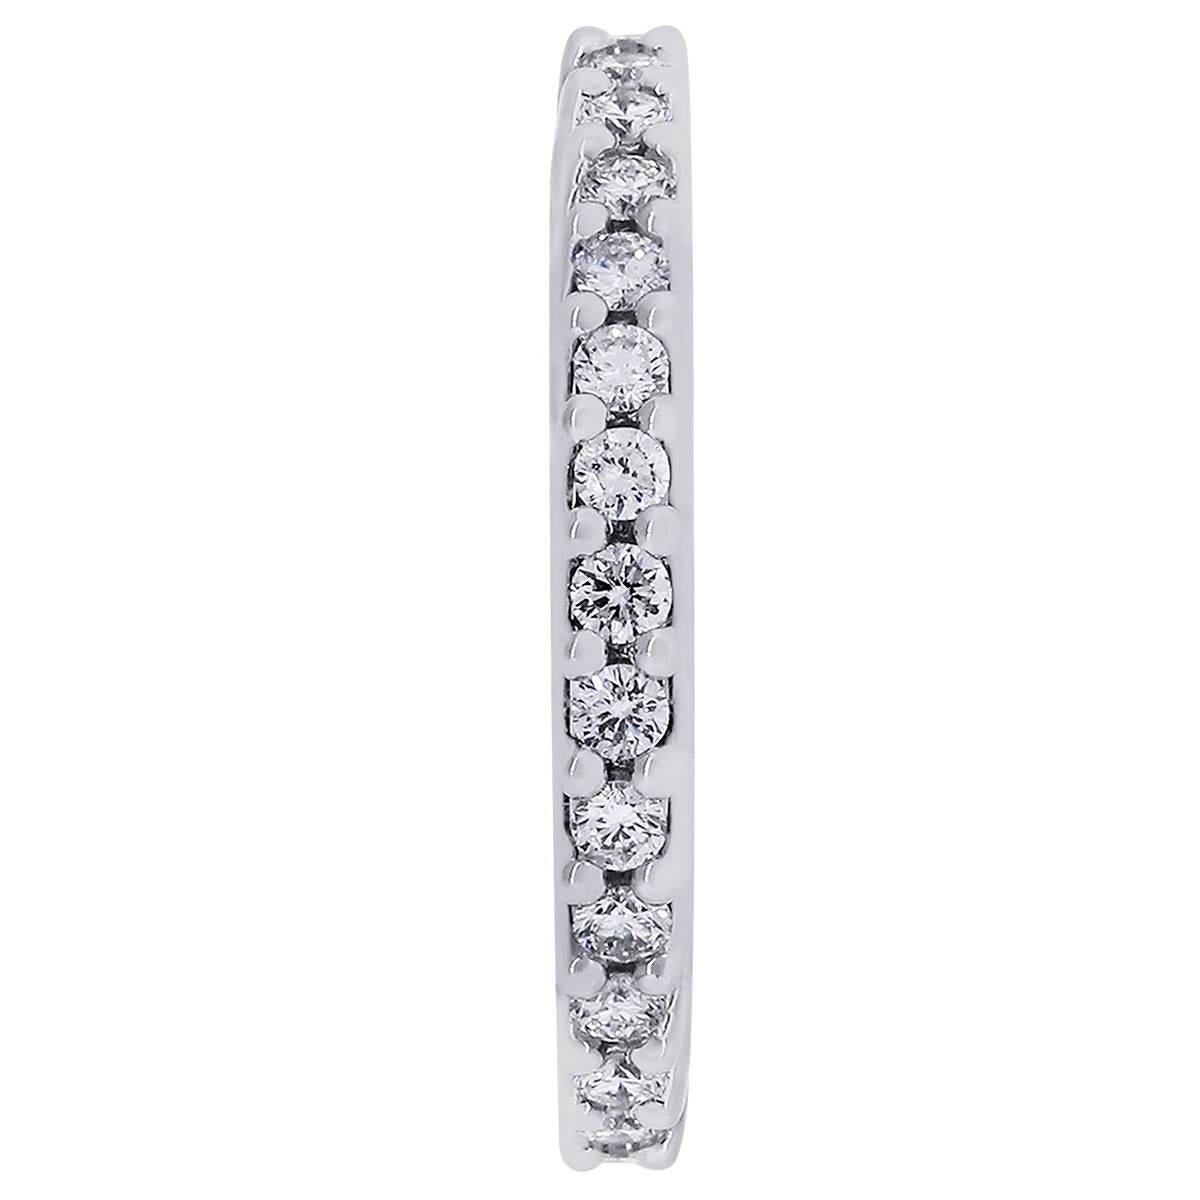 Material: 14k white gold
Diamond Details: Approximately 1.05ctw round brilliant diamonds. Diamonds are G in color and SI in clarity.
Size: 7 flexible up to size 8 (cannot be sized)
Measurement: 0.95